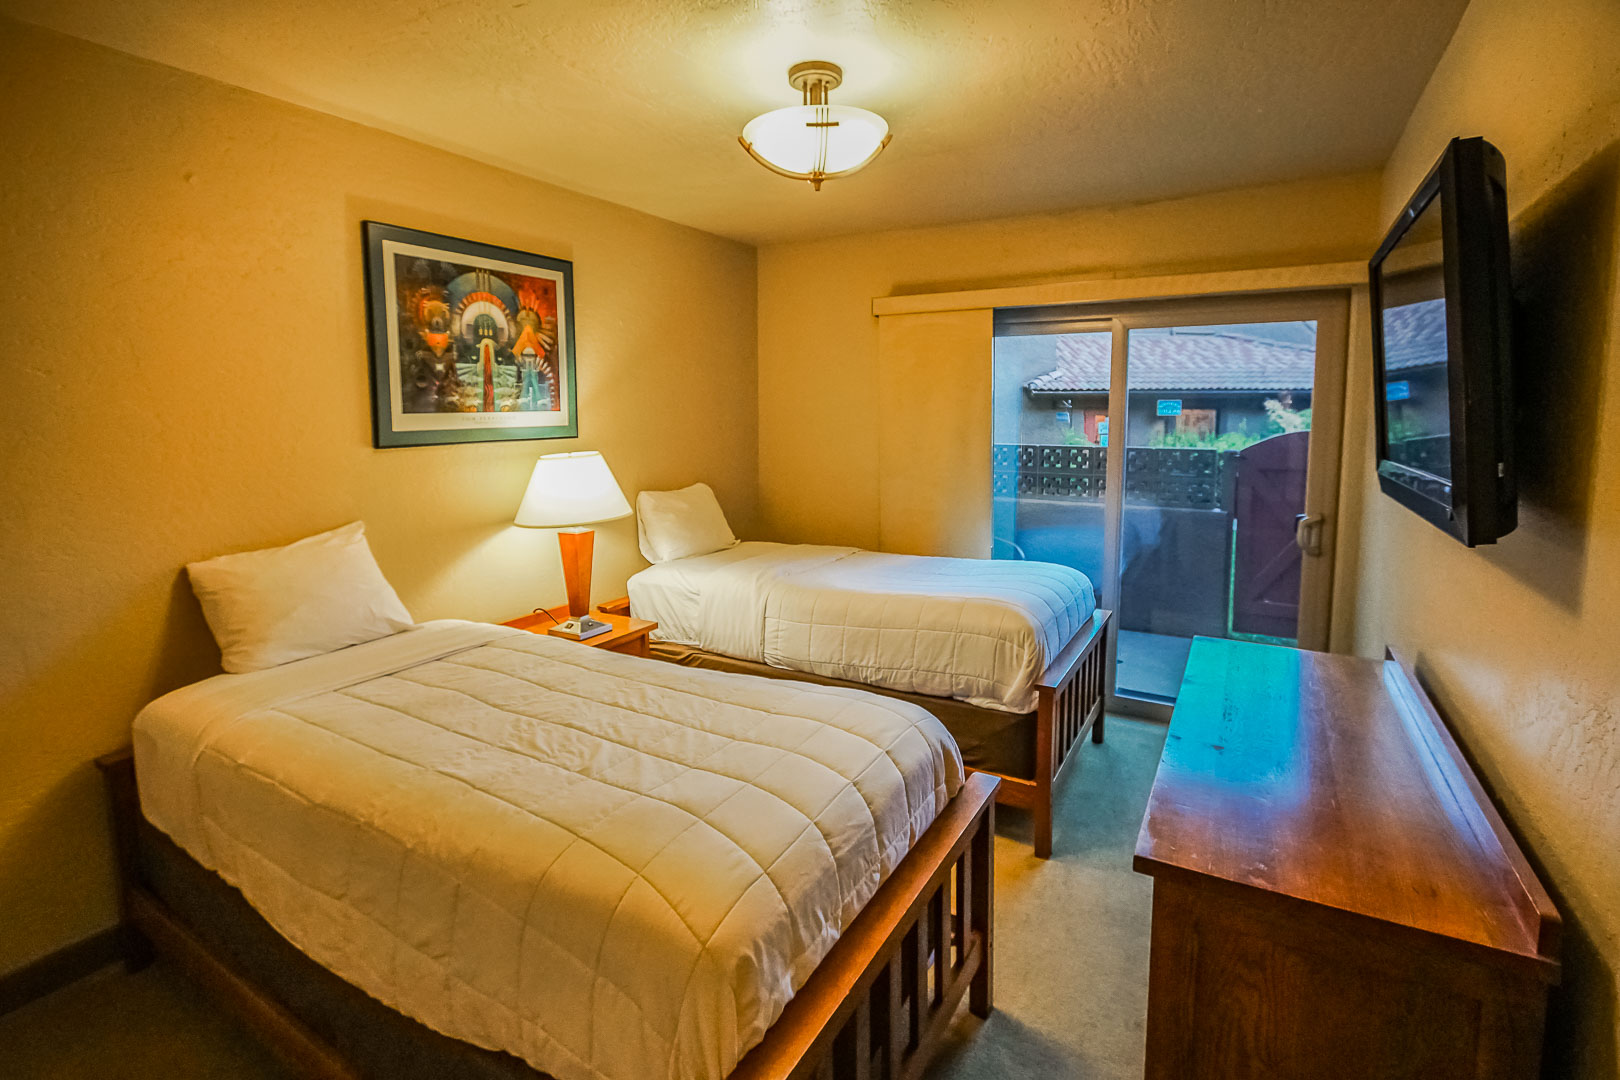 A bedroom with double beds at VRI's Villas of Sedona in Arizona.